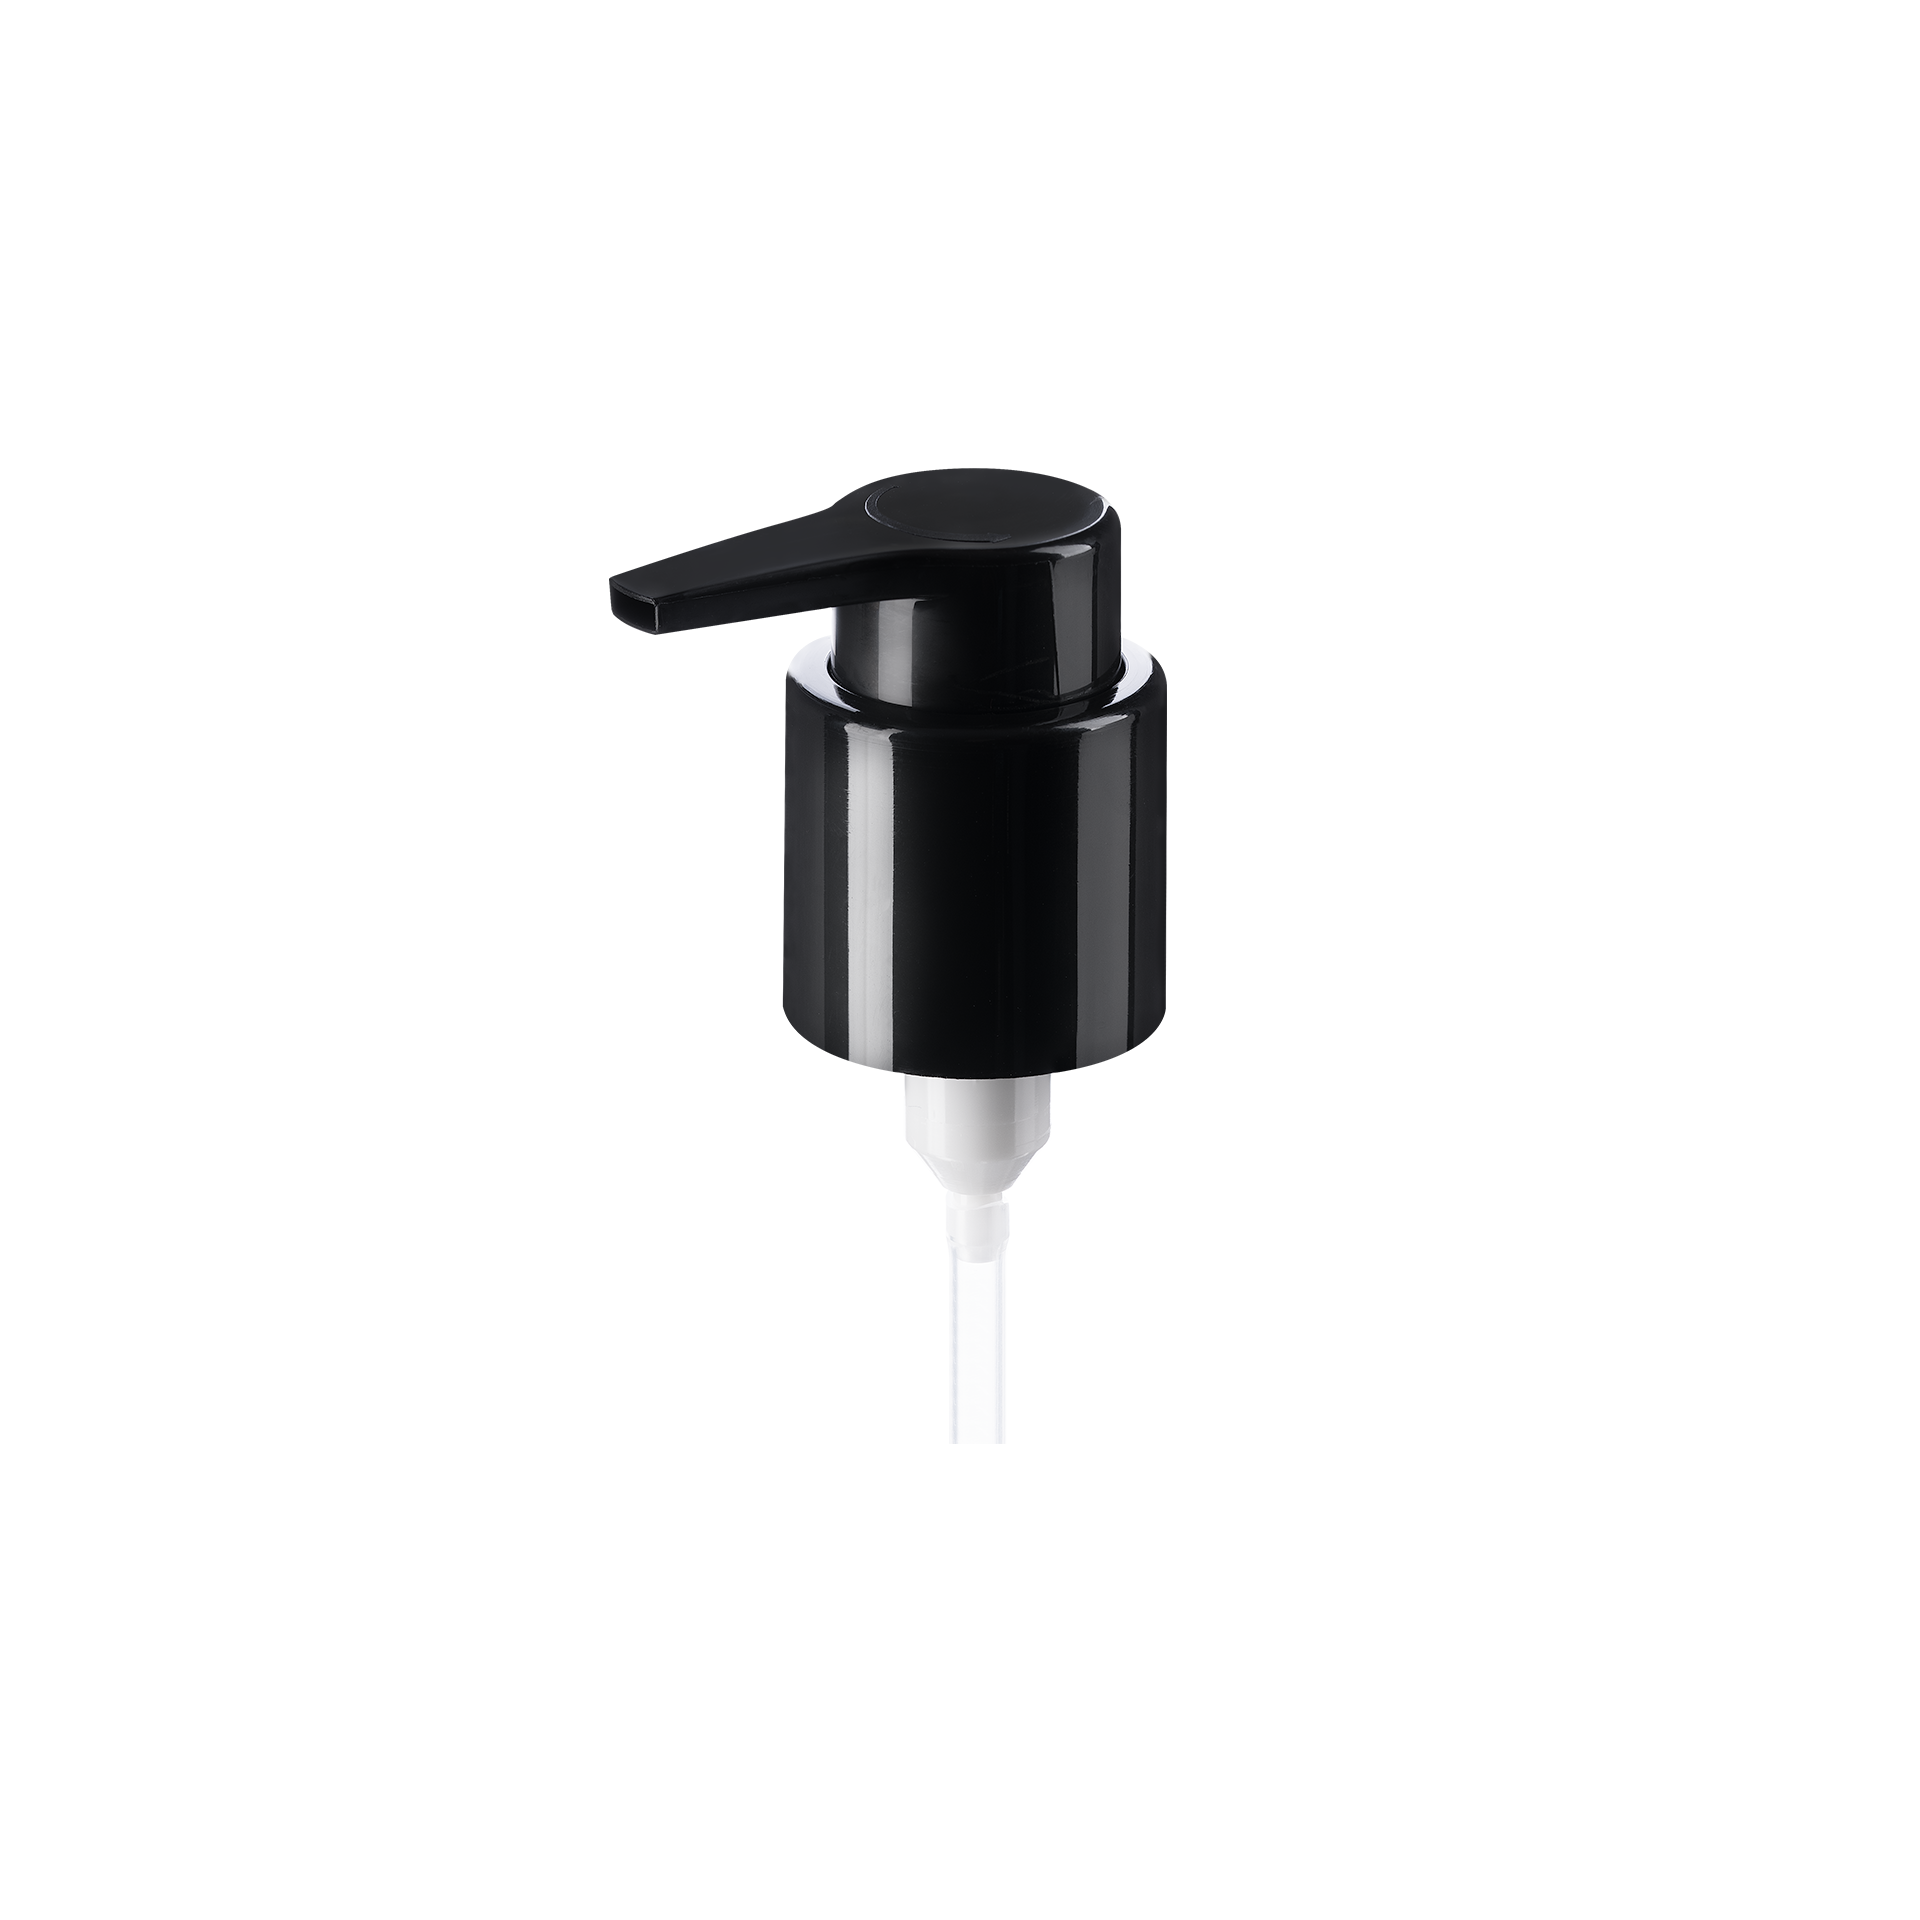 Lotion pump Extended Nozzle 24/410, PP, black, smooth, dose 0.50ml, security clip (Linden LW 250)